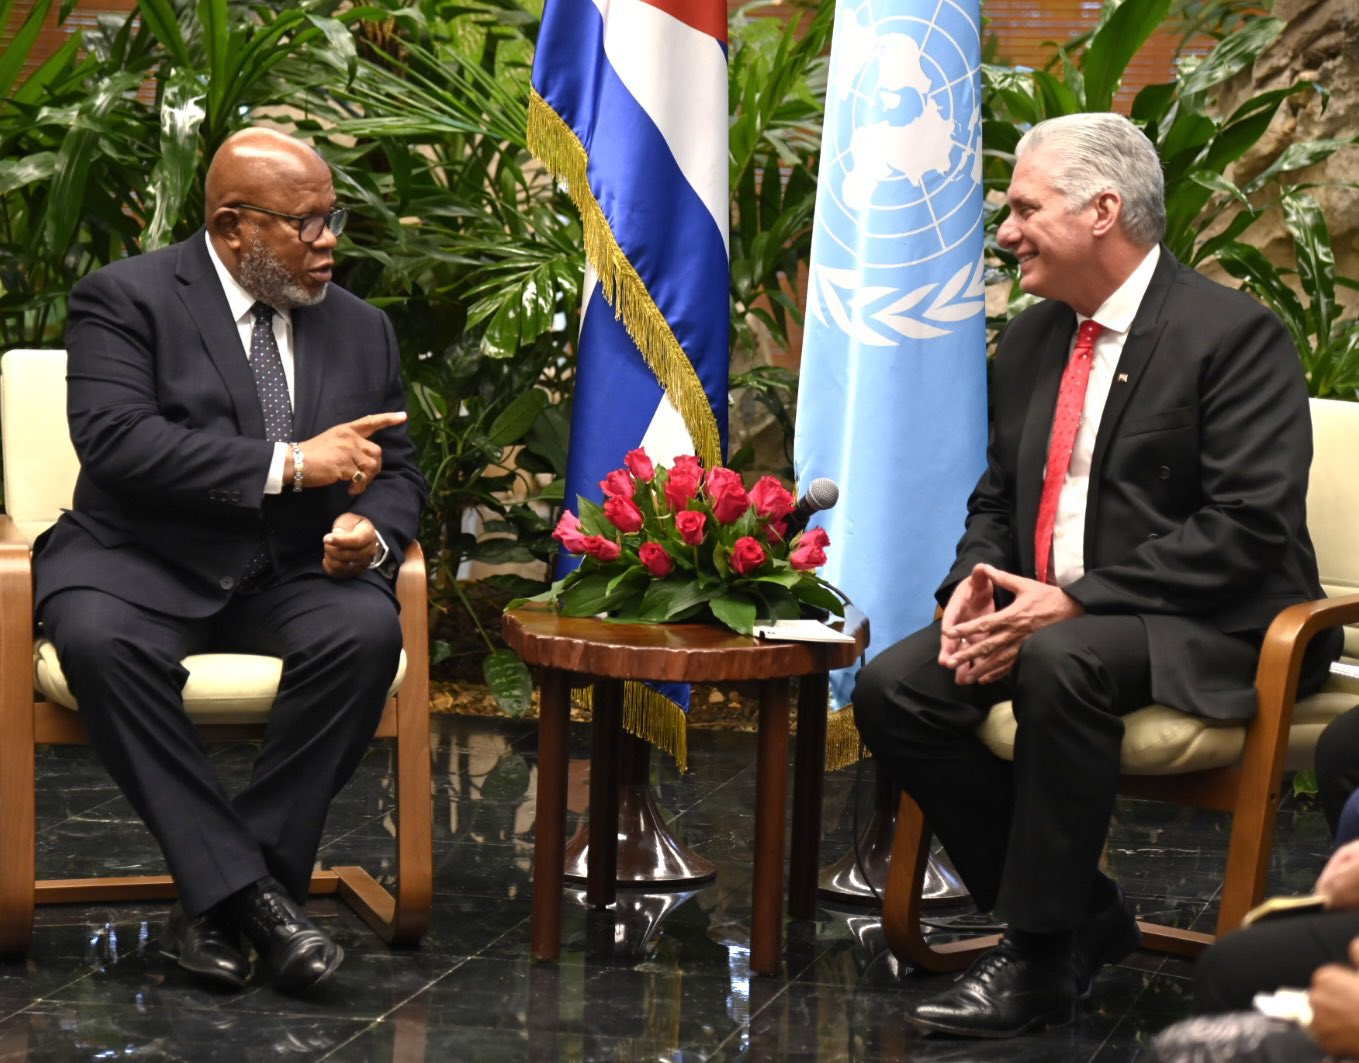 a-senior-un-official-and-the-cuban-leaders-compete-in-mutual-self-hype